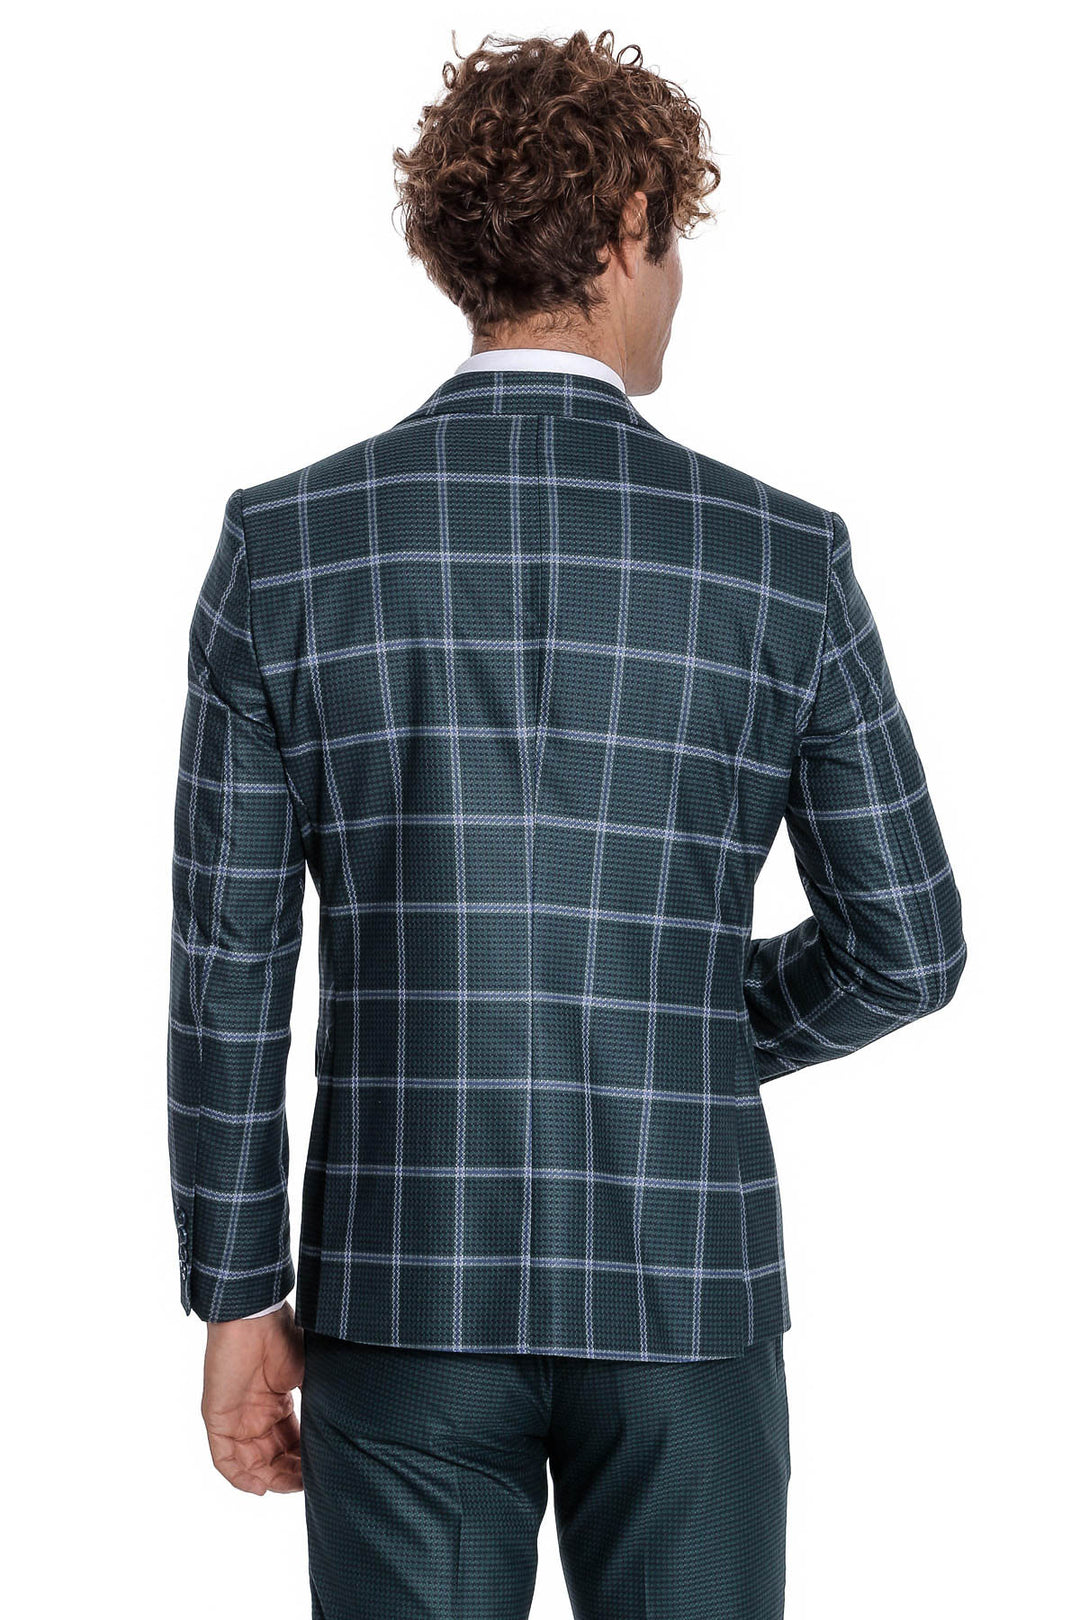 Checked Patterned Slim Fit Green Men Suit - Wessi